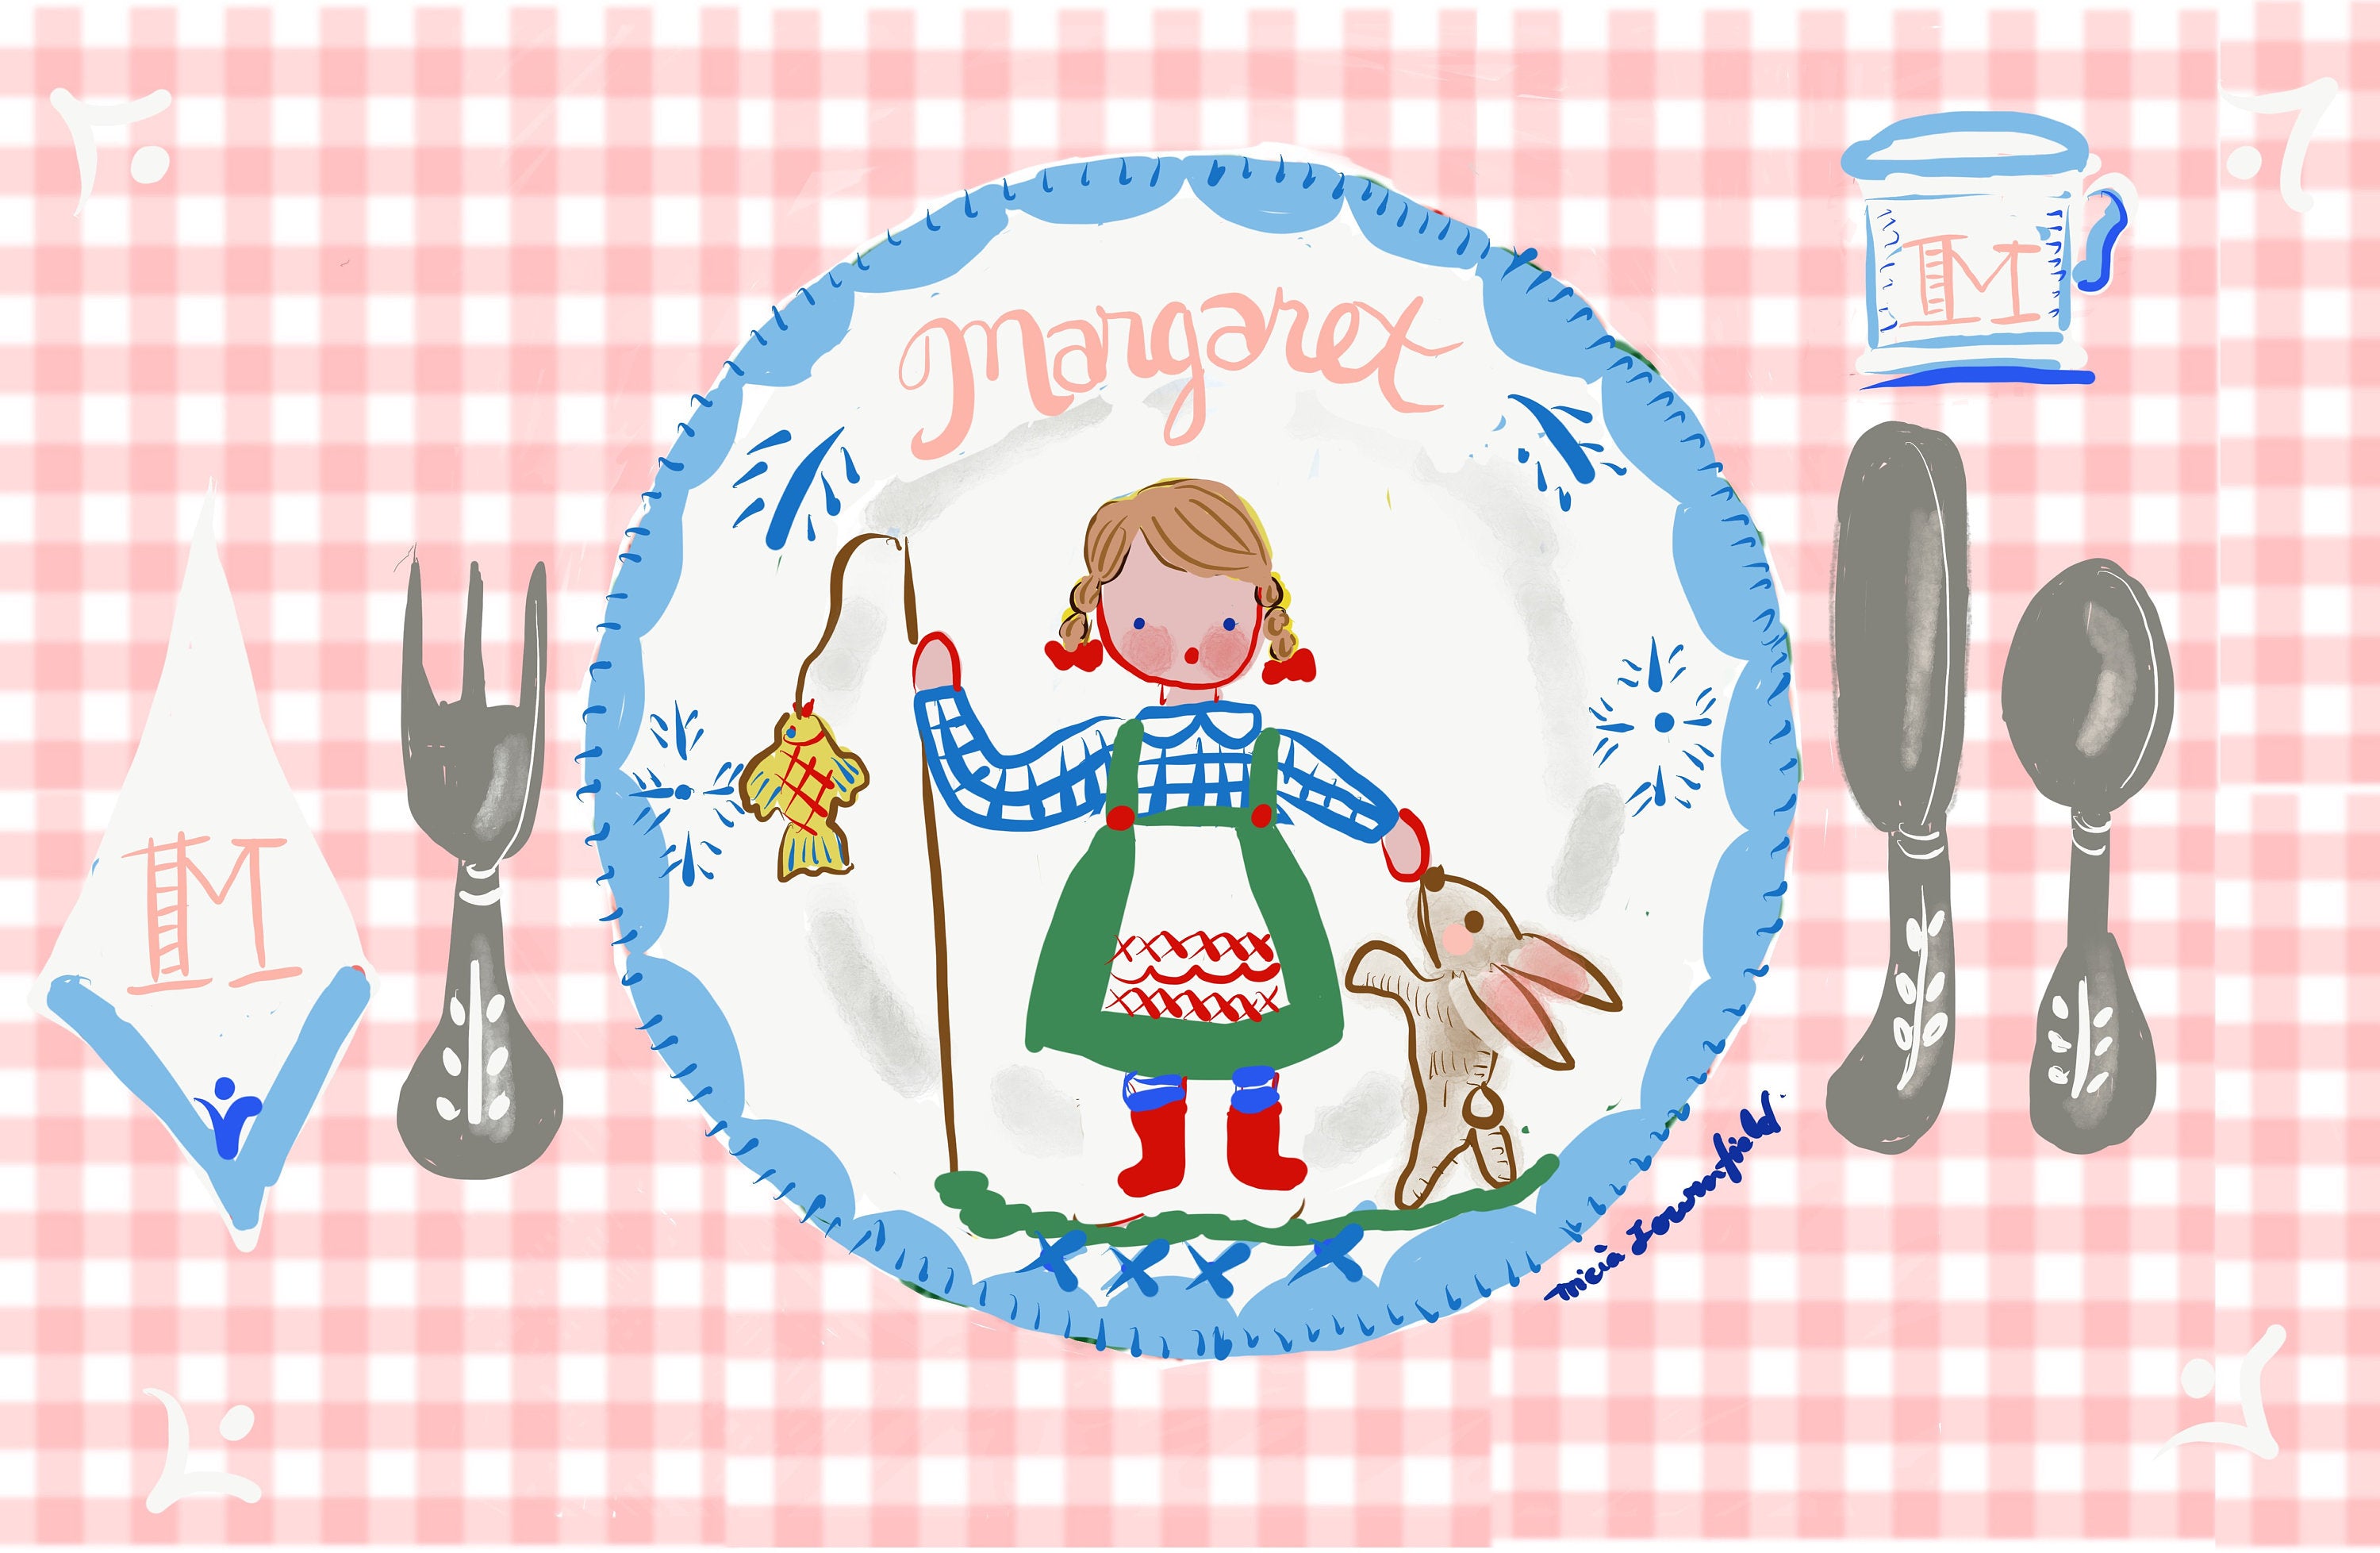 Laminated Placemat - Blue Fisherman Girl and Bunny - Tricia Lowenfield Design